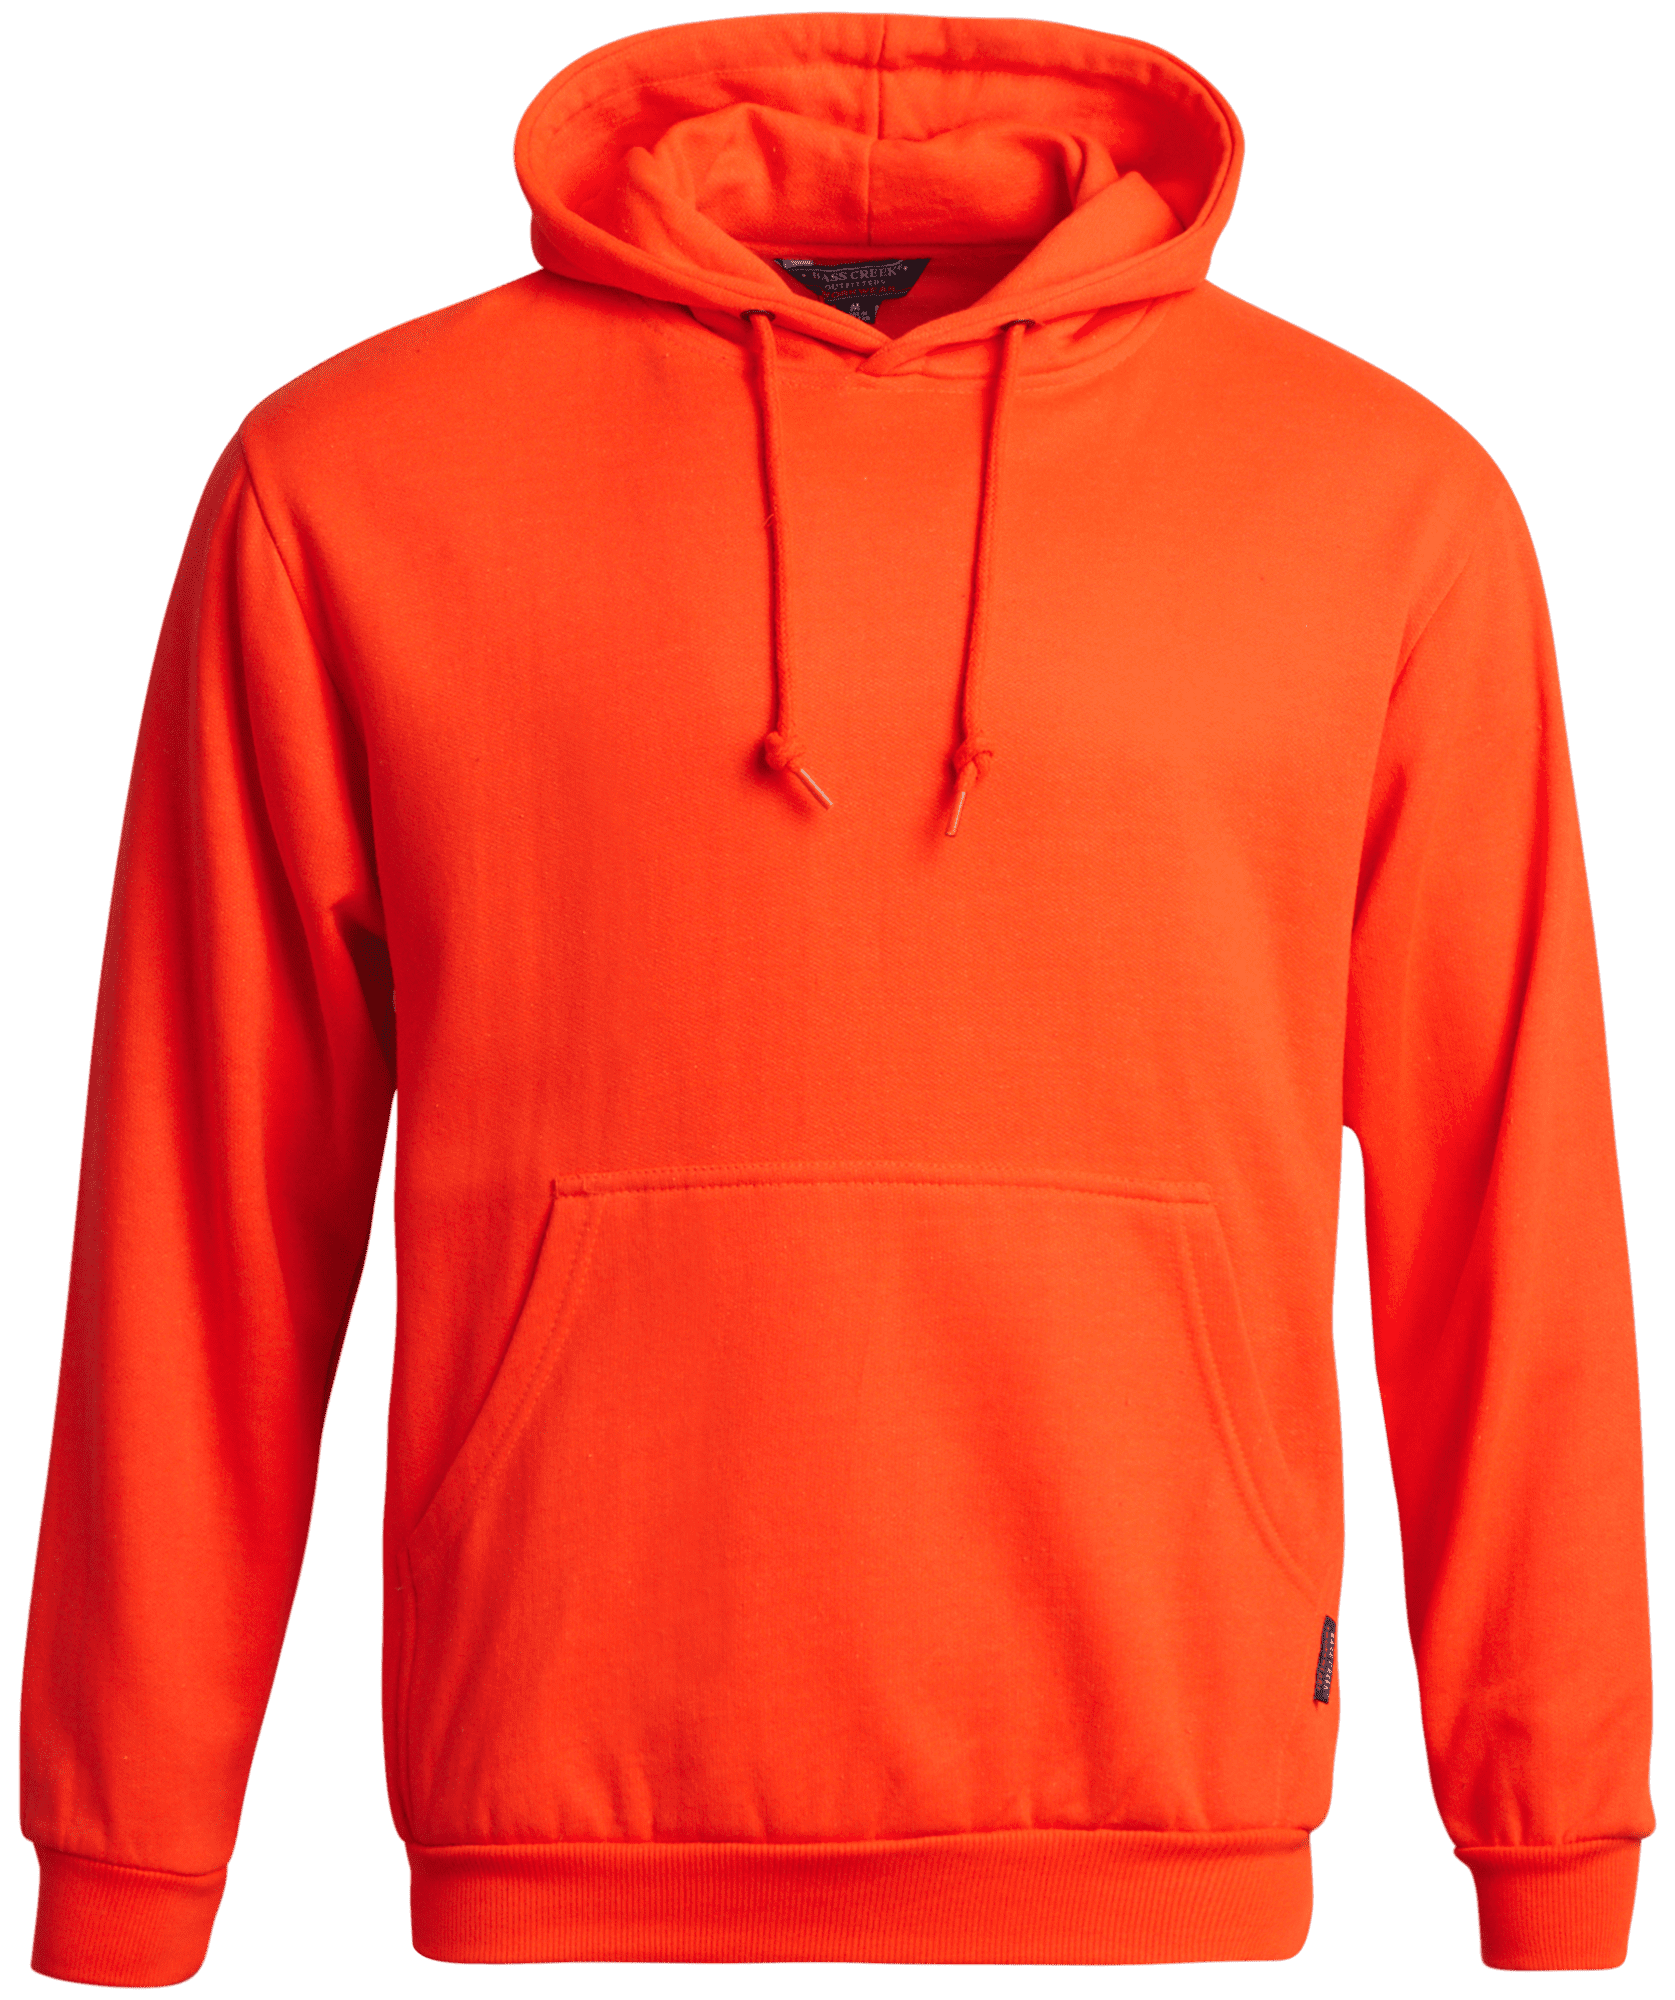 Bass Creek Outfitters Men's Sweatshirt - High Visibility Neon Hoodie ...